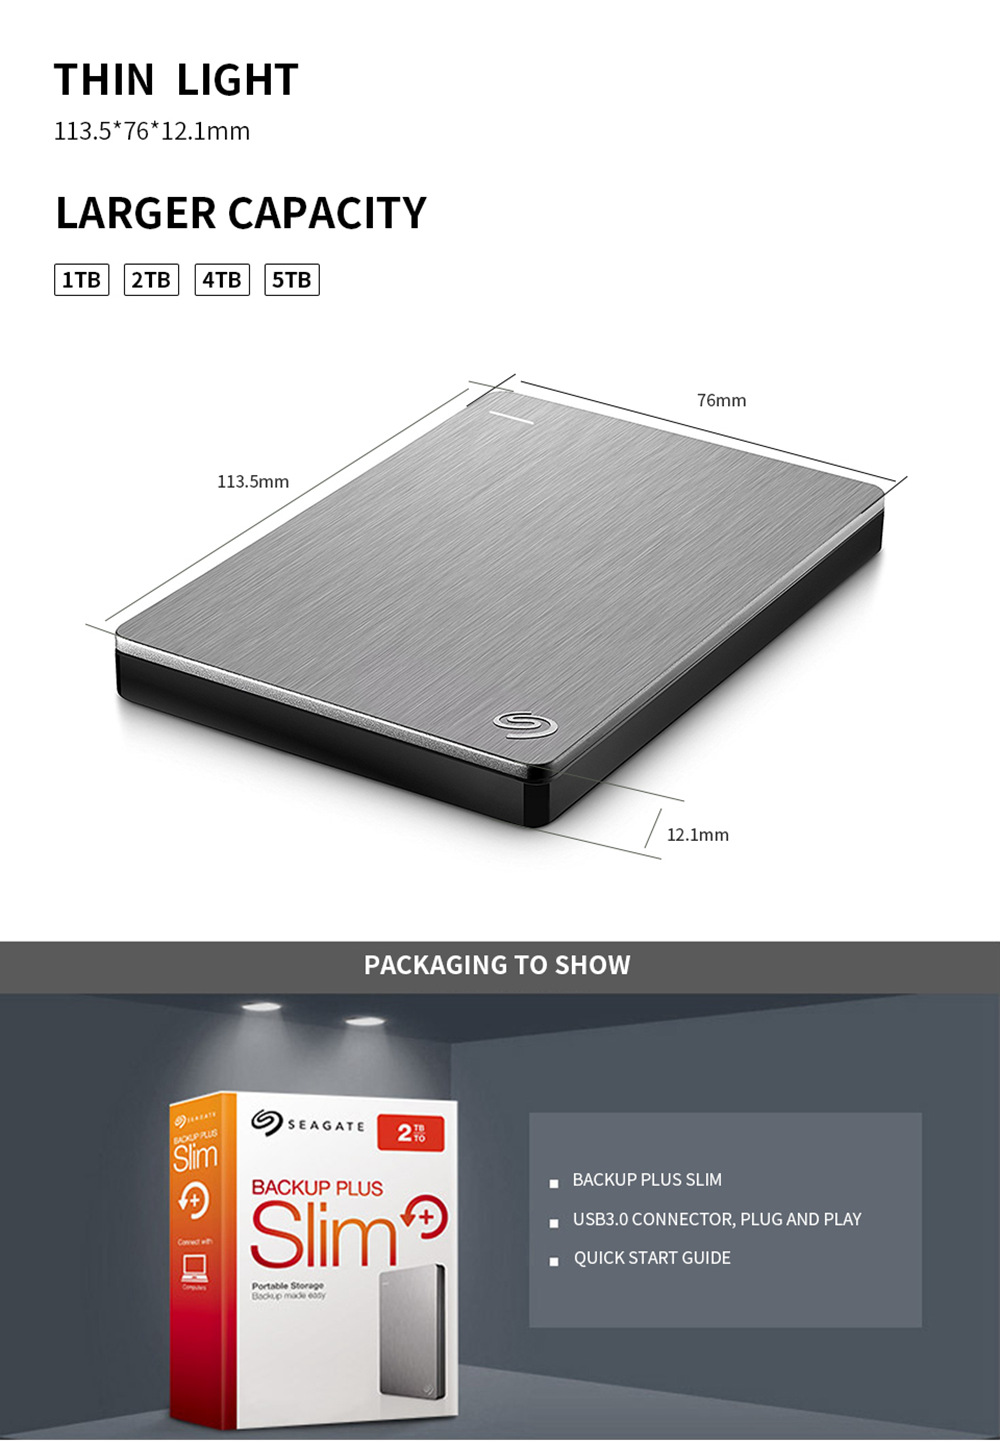 reformat seagate backup plus slim for mac and pc